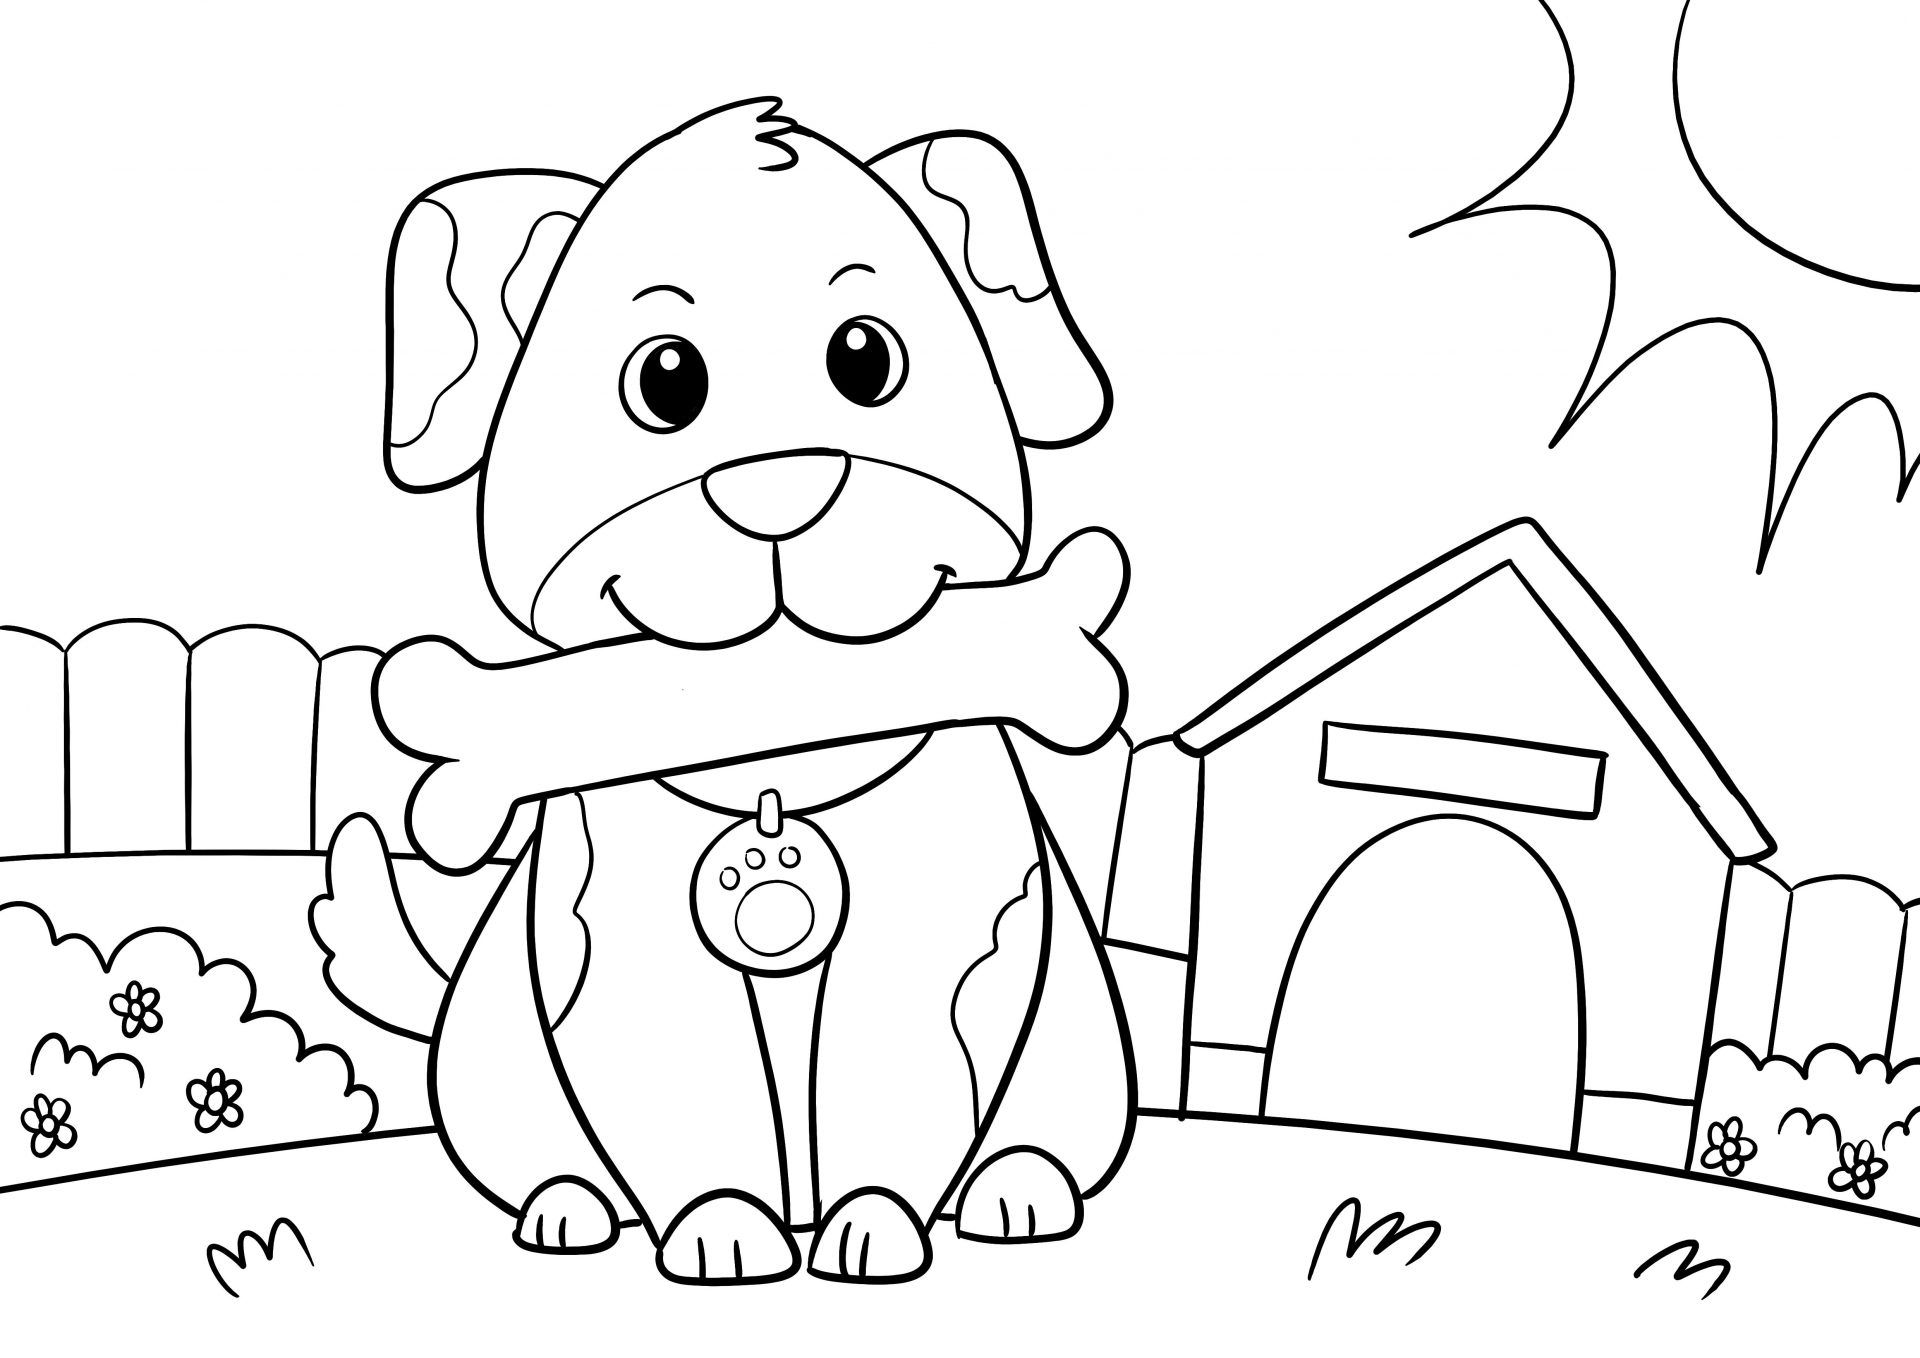 Cute Dog Coloring page - Free Printable Sheet for Kids - diy-magazine.com